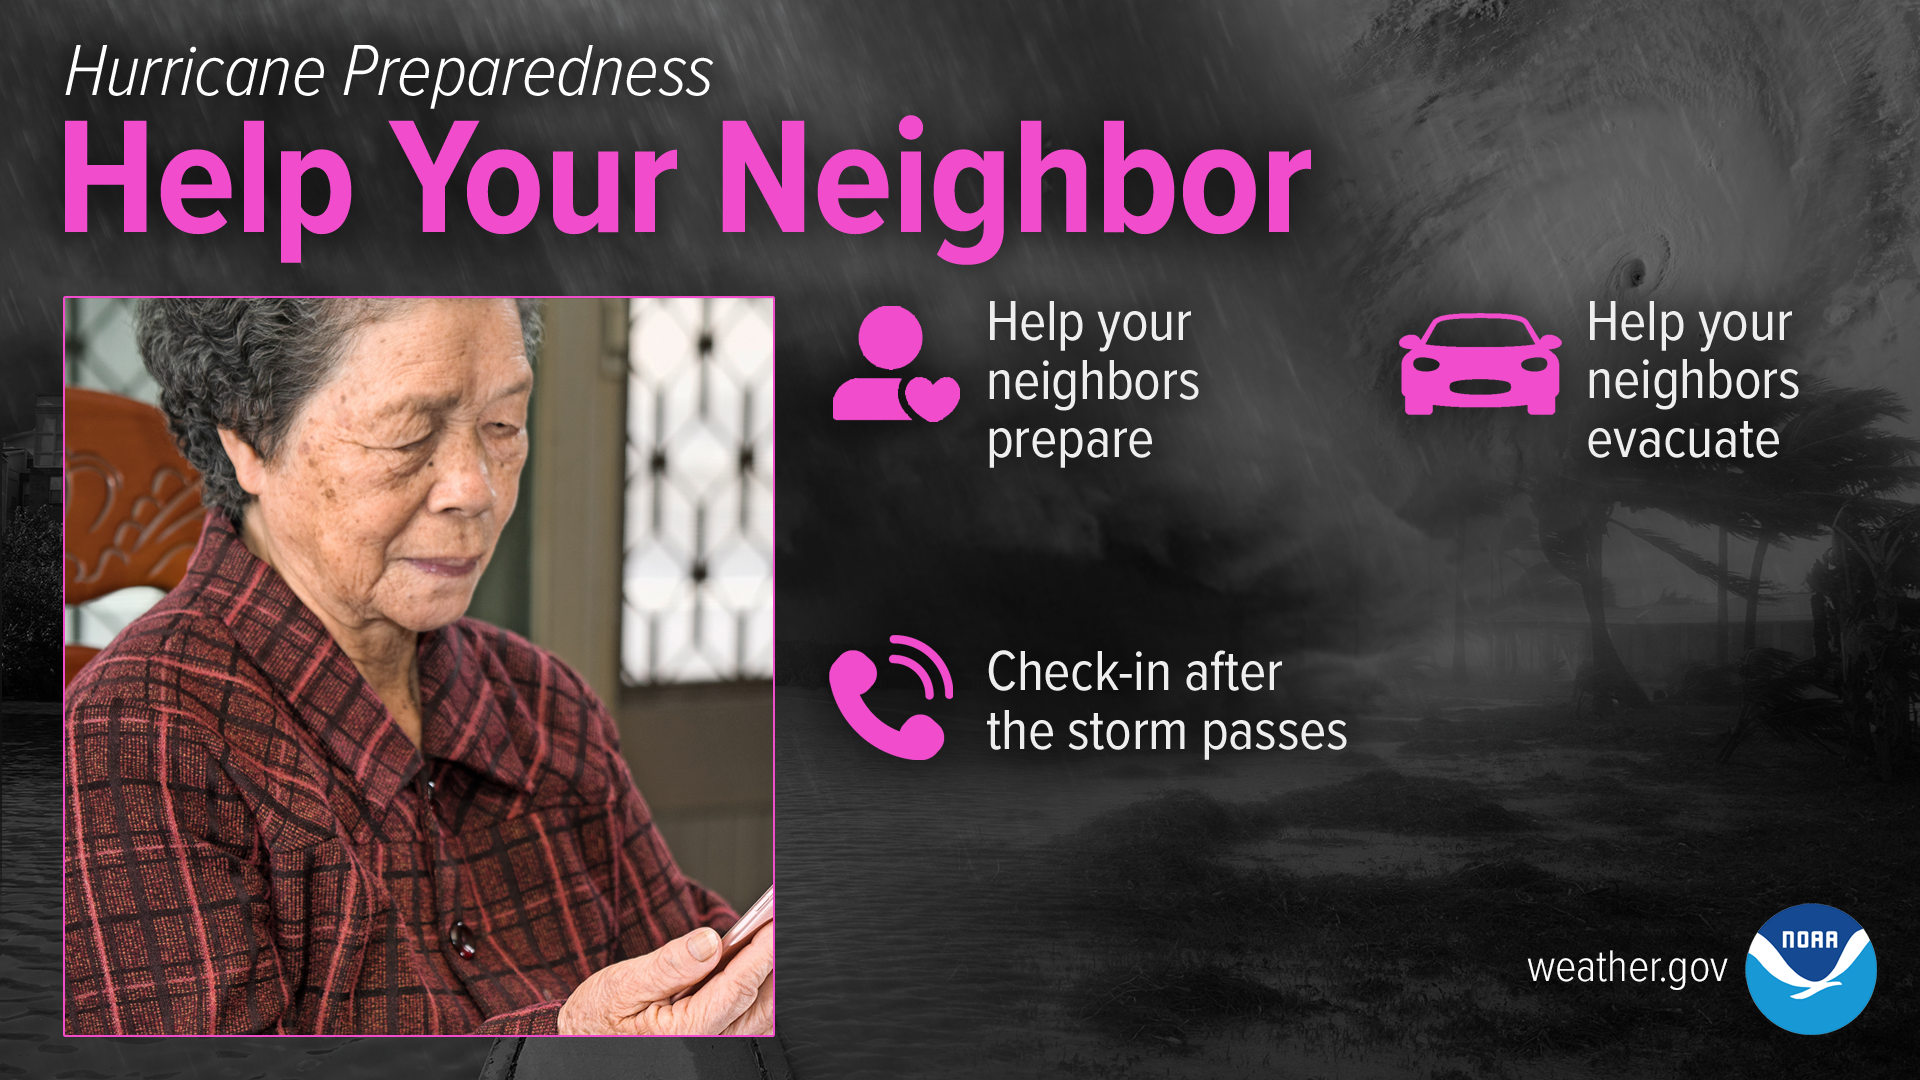 Hurricane Preparedness: Help Your Neighbor. Many people, especially senior citizens, rely on the assistance of neighbors before and after hurricanes. Help your neighbors collect the supplies they'll need before the storm. Assist them with evacuation if ordered to do so, or check on them after it's safe for you to head outside.